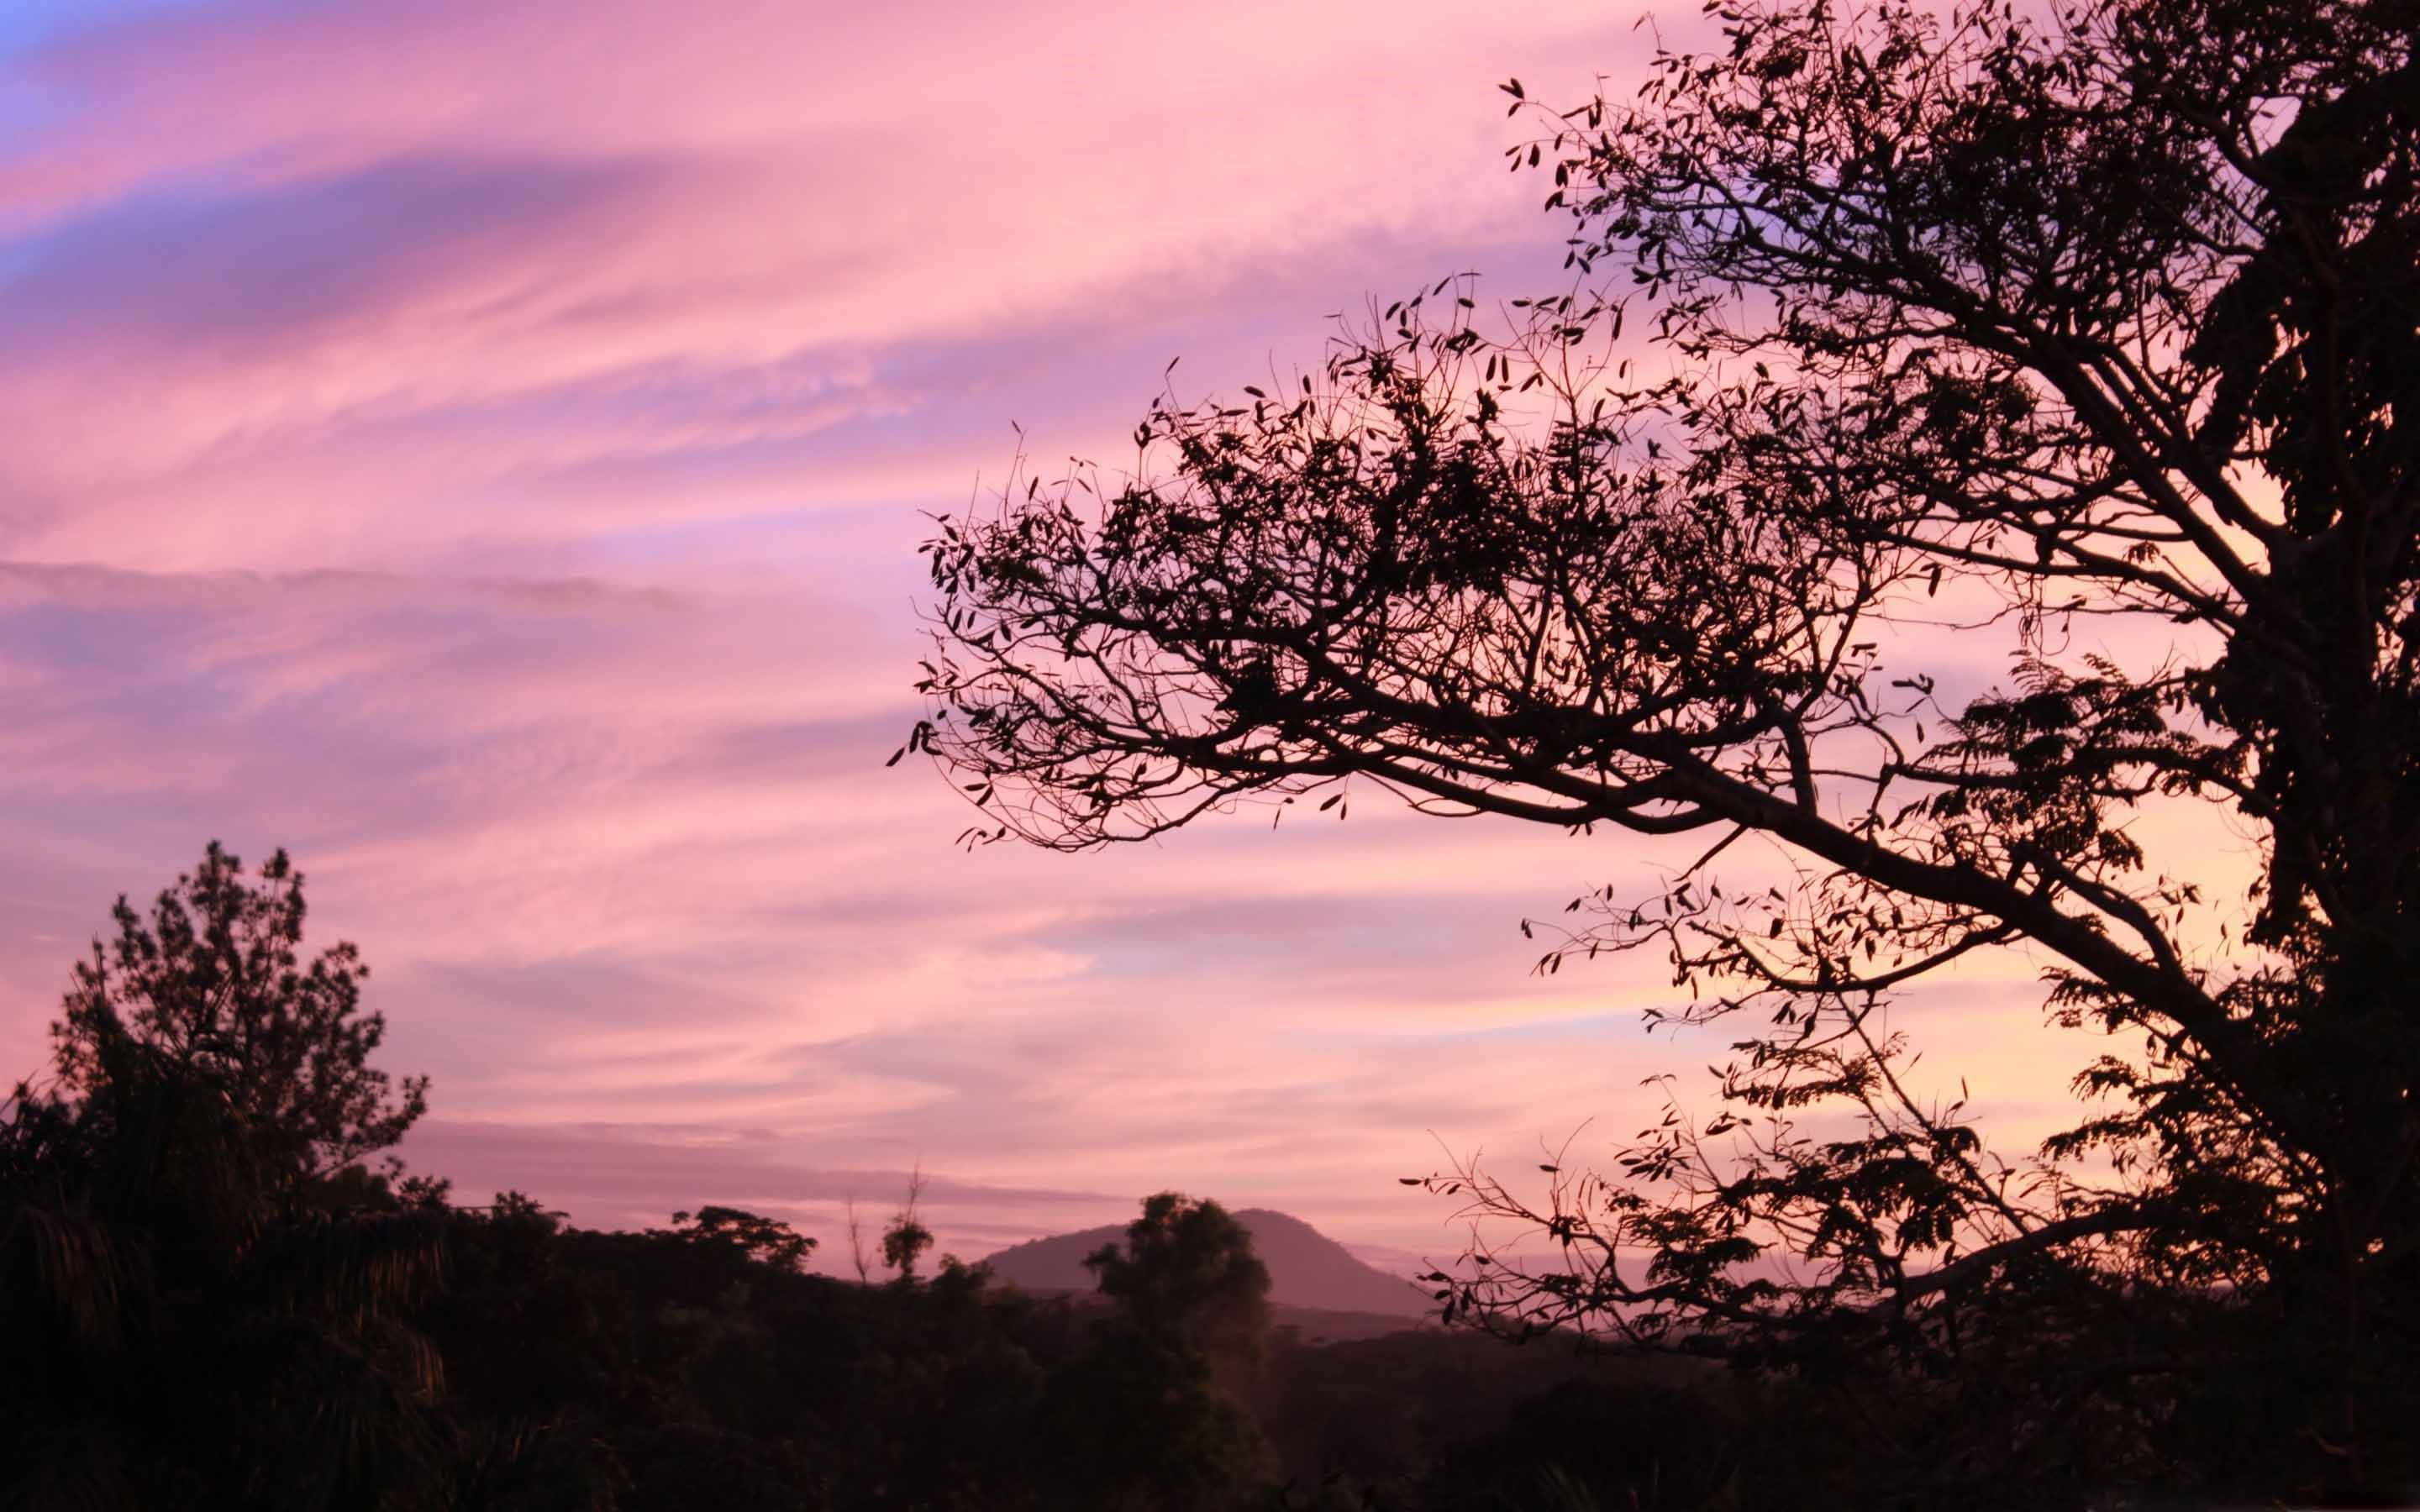 Pink Aesthetic Background Landscape Sky Upload Personal Featured Pink